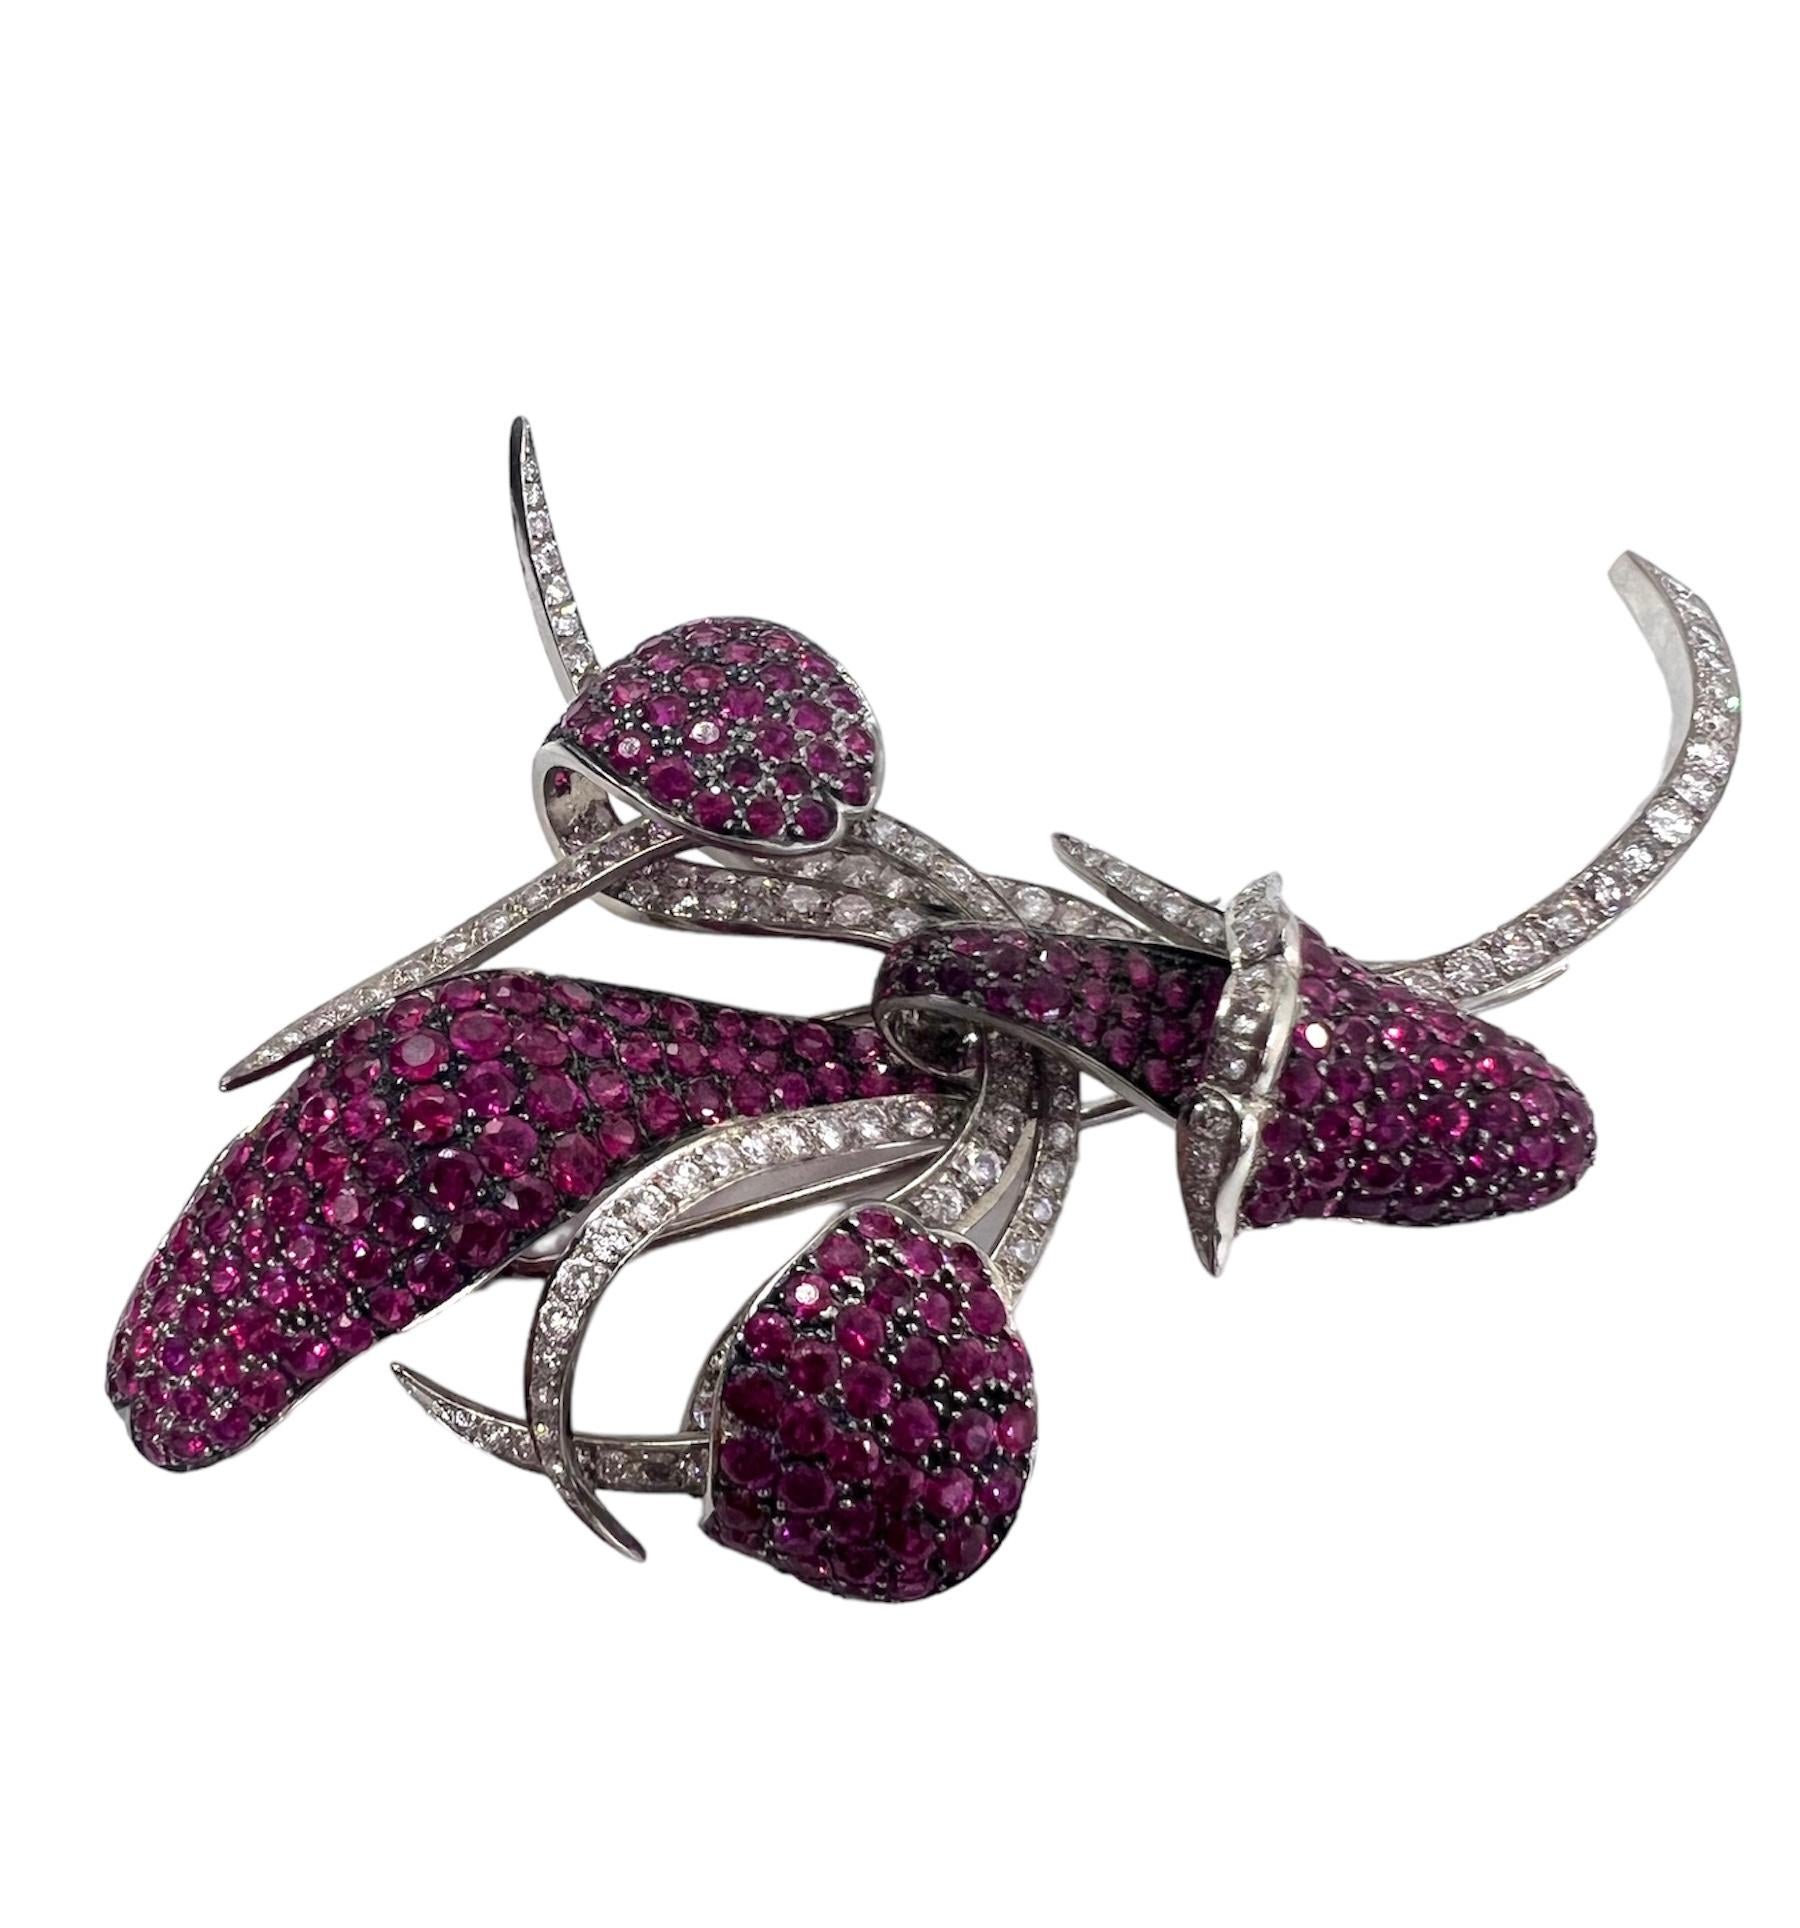 Designed by Sophia D, this platinum brooch is with 8.86 carat pink sapphire and 3.92 carat diamond.

Sophia D by Joseph Dardashti LTD has been known worldwide for 35 years and are inspired by classic Art Deco design that merges with modern